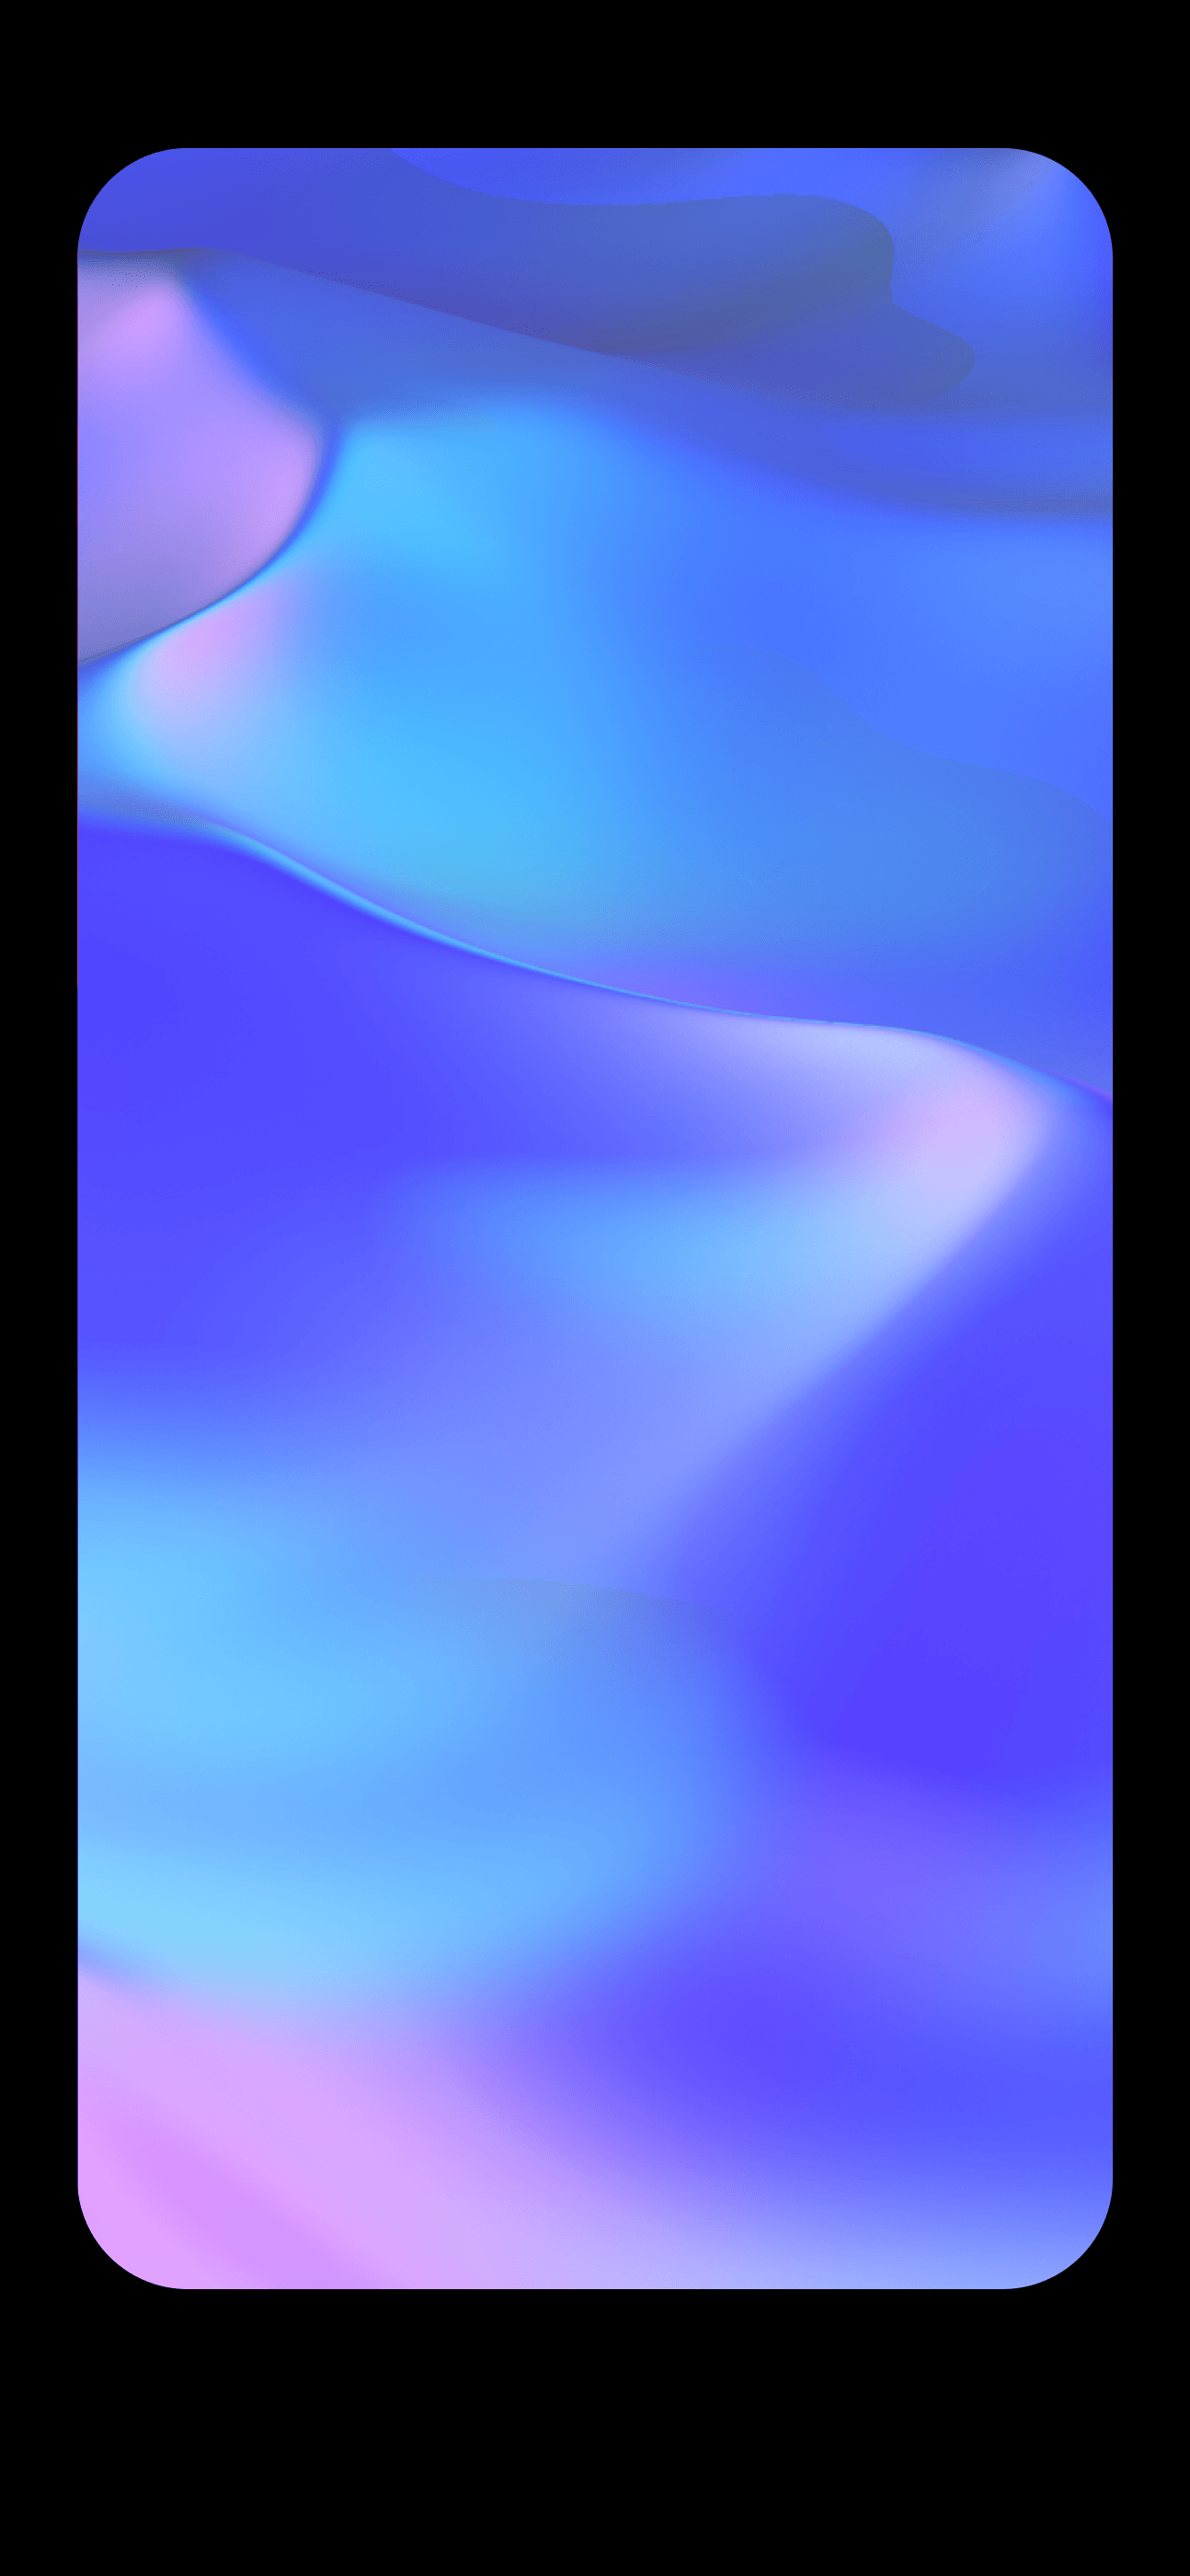 Hide the iPhone X's intrusive notch with these wallpaper. BackDrop